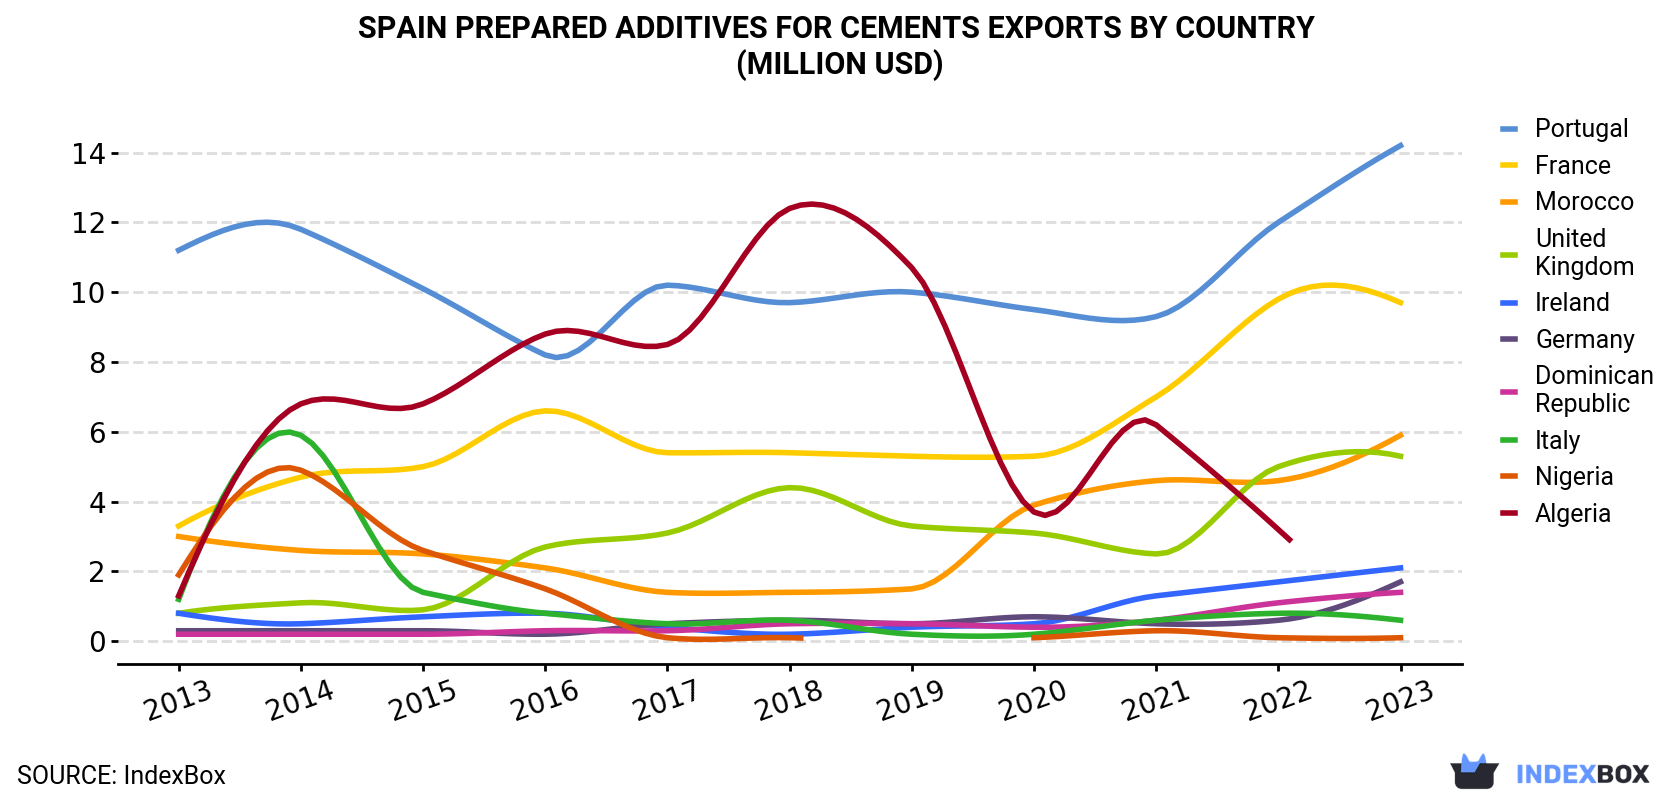 Spain Prepared Additives For Cements Exports By Country (Million USD)